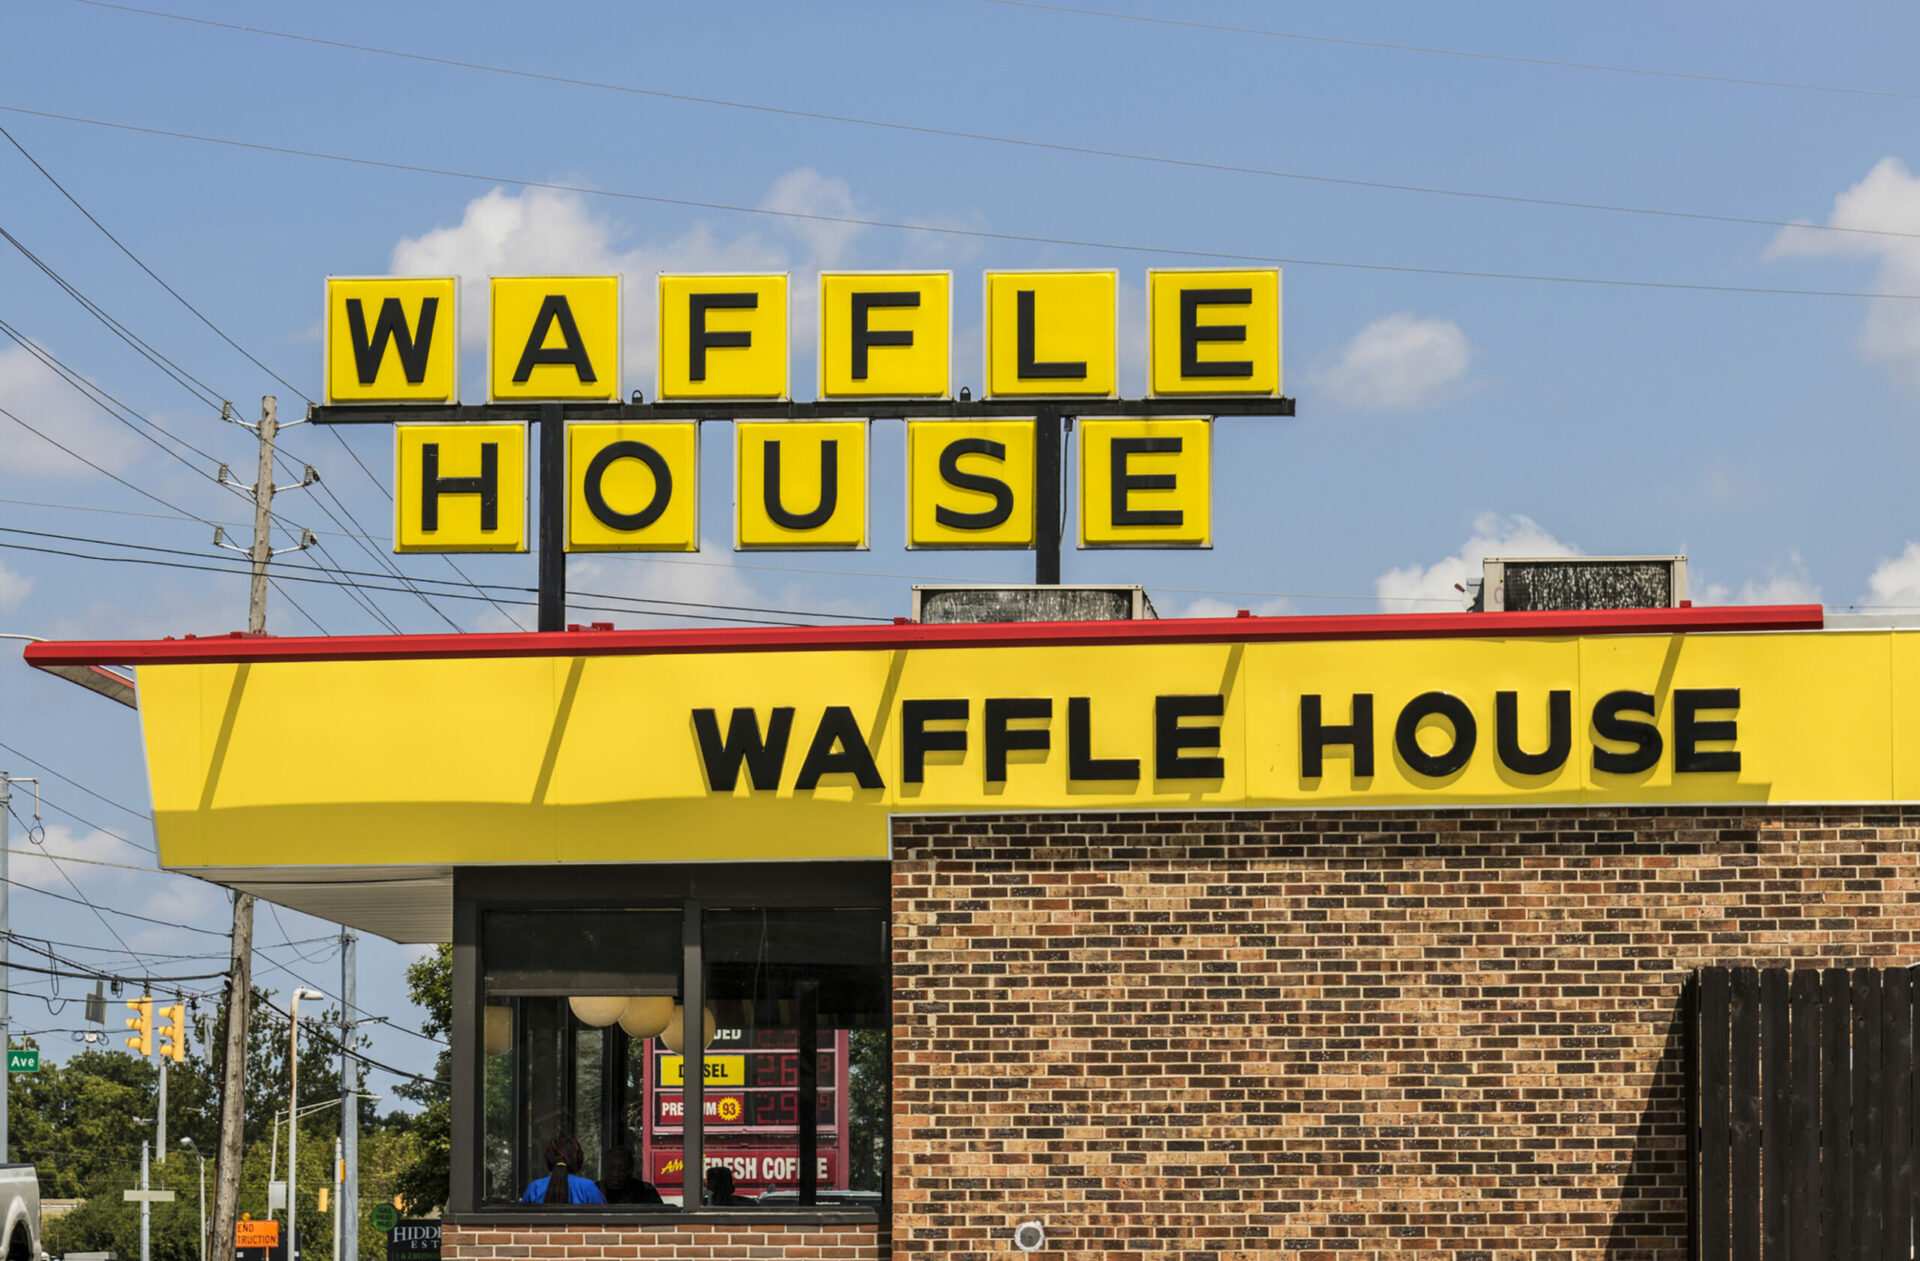 6 shot, 1 dead in Indianapolis Waffle House